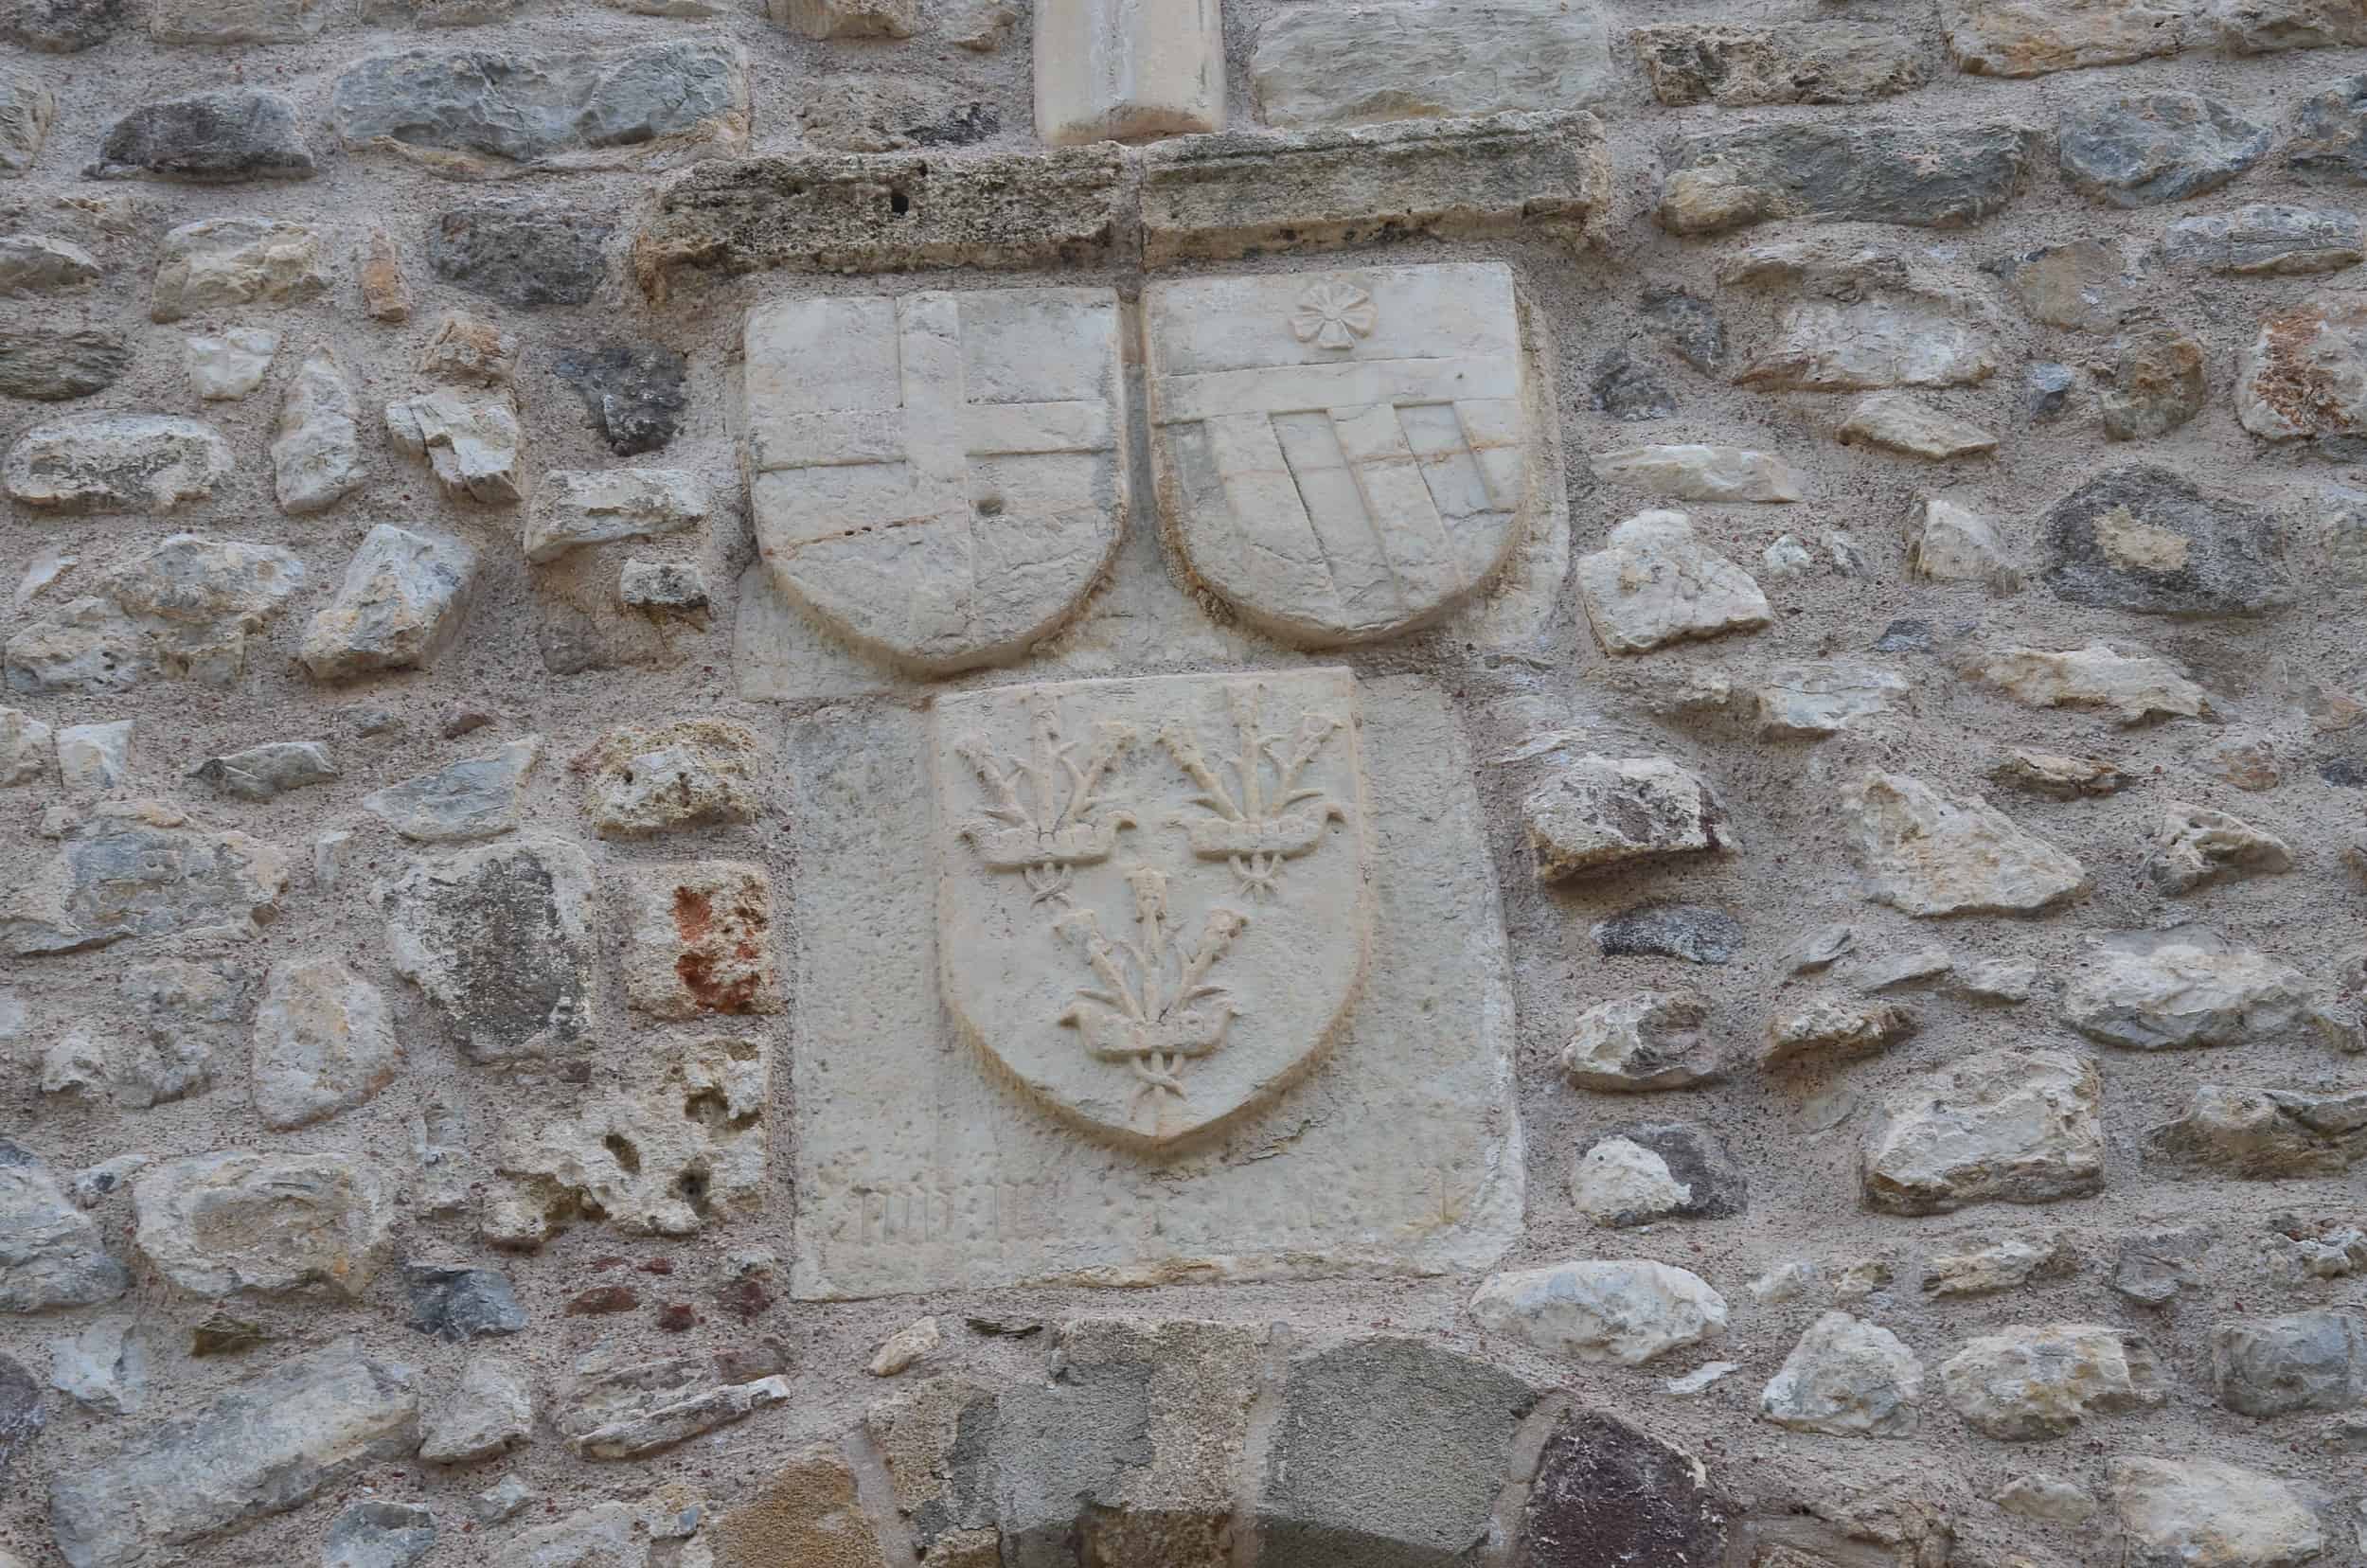 Coats of arms of the Order of the Knights of Saint John (top left); Giambattista Orsini (top right); and Francesco Boxolles (bottom) at Bodrum Castle in Turkey